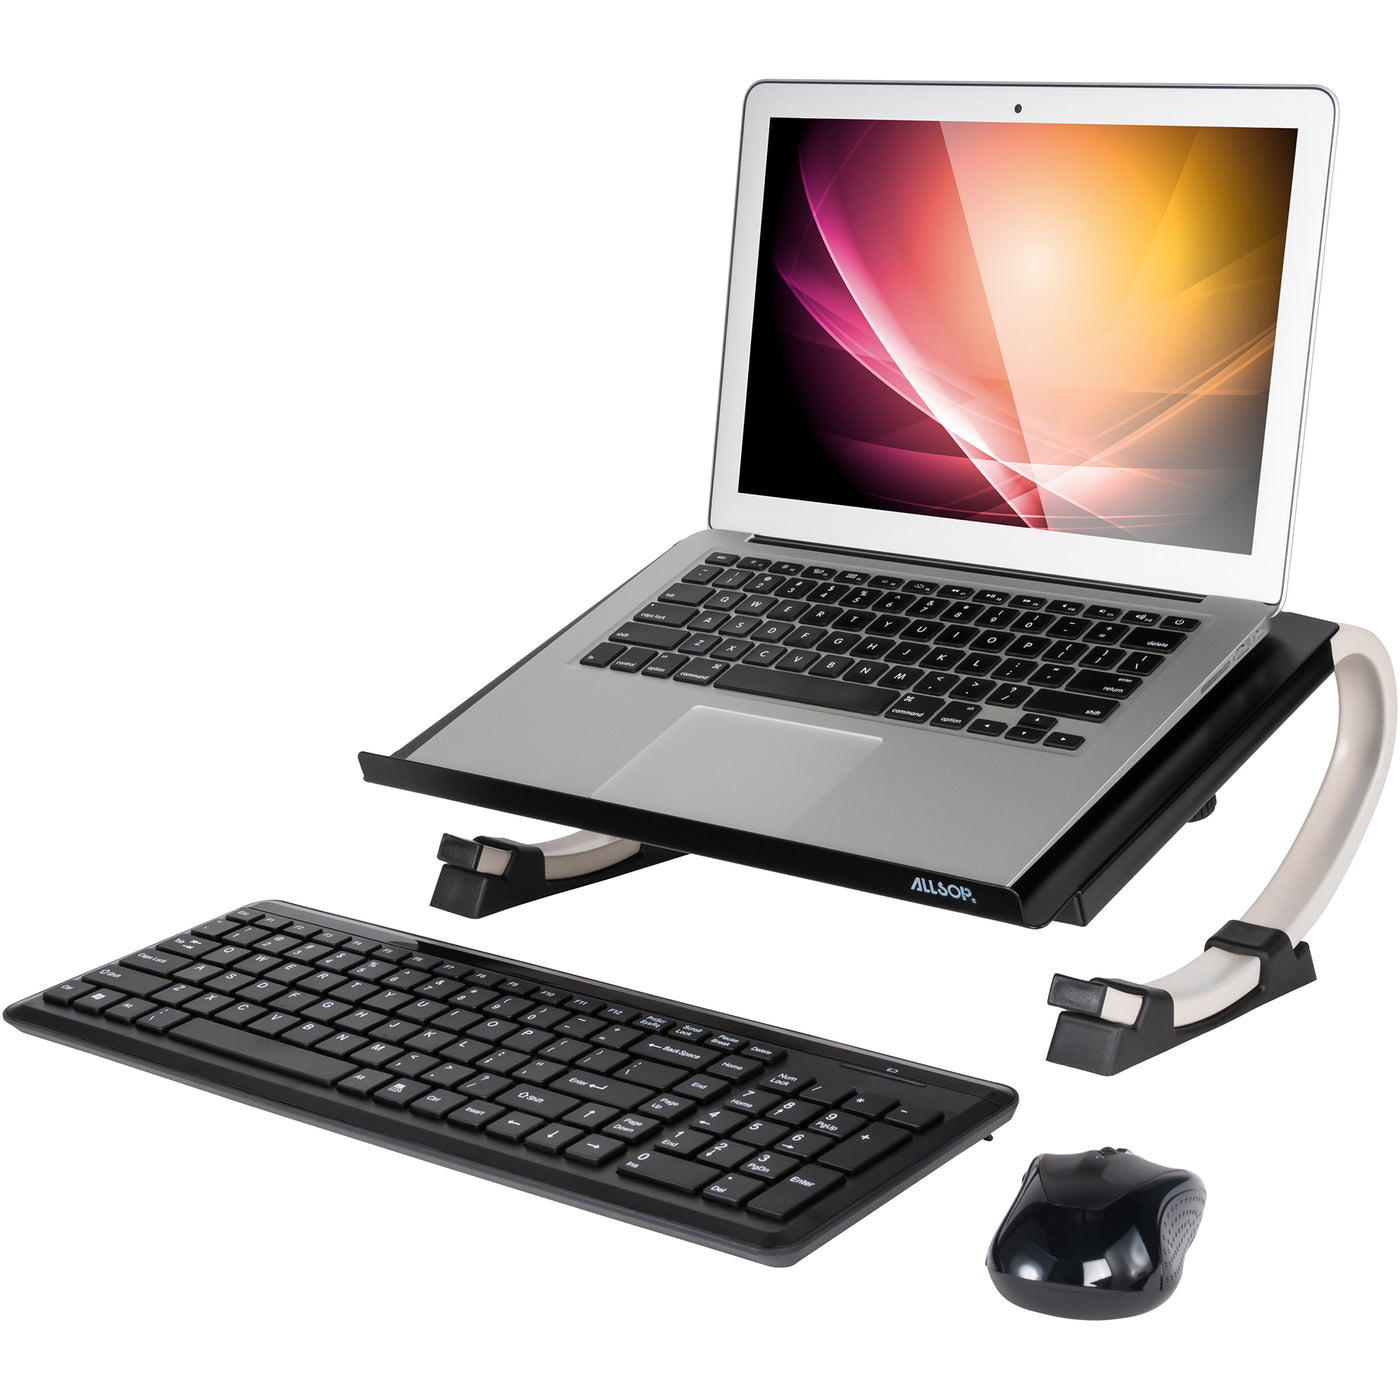 Isolated studio photo of the Redmond Adjustable Curve Laptop Stand holding a laptop at and angle. Photo also includes a separate keyboard and mouse.